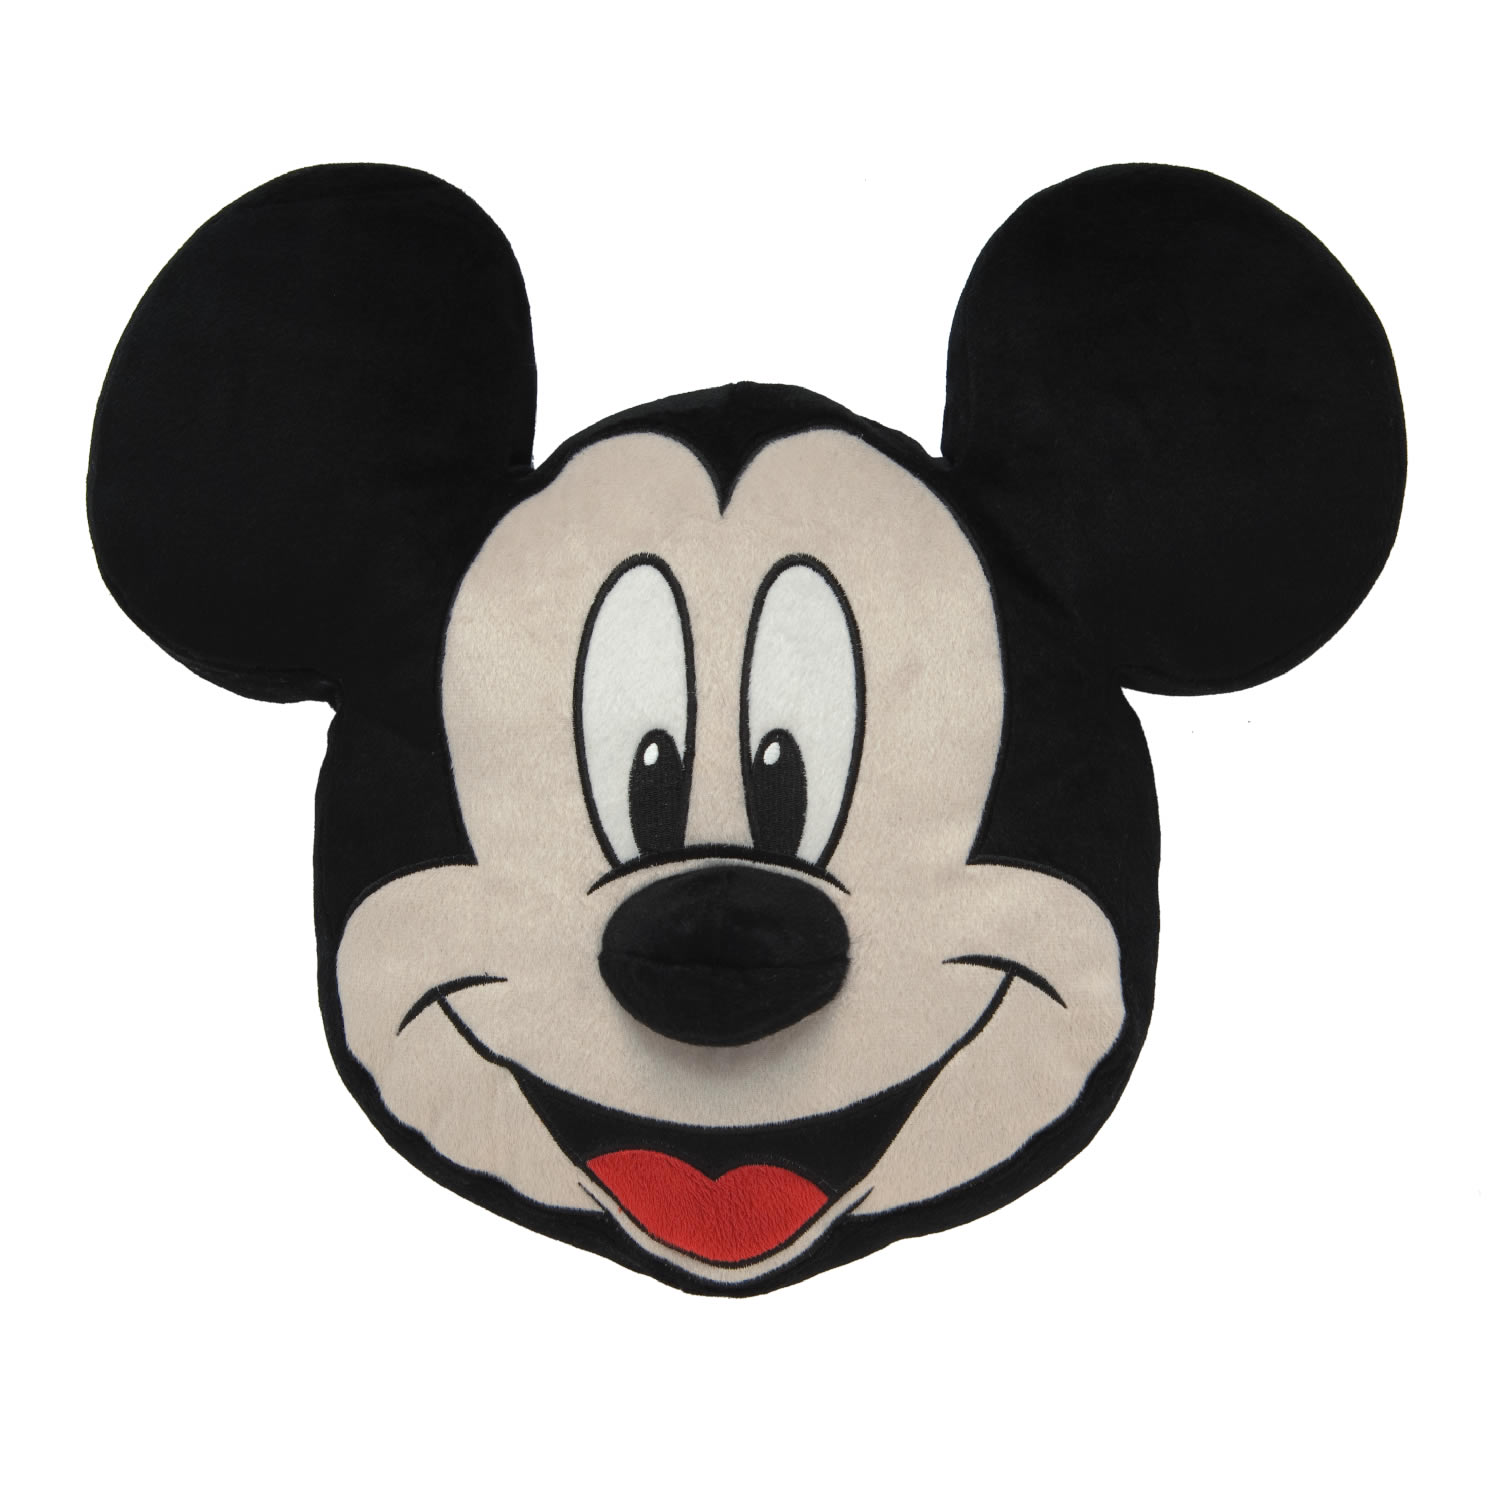 Mickey Mouse Head 91 Hd Wallpapers in Cartoons 